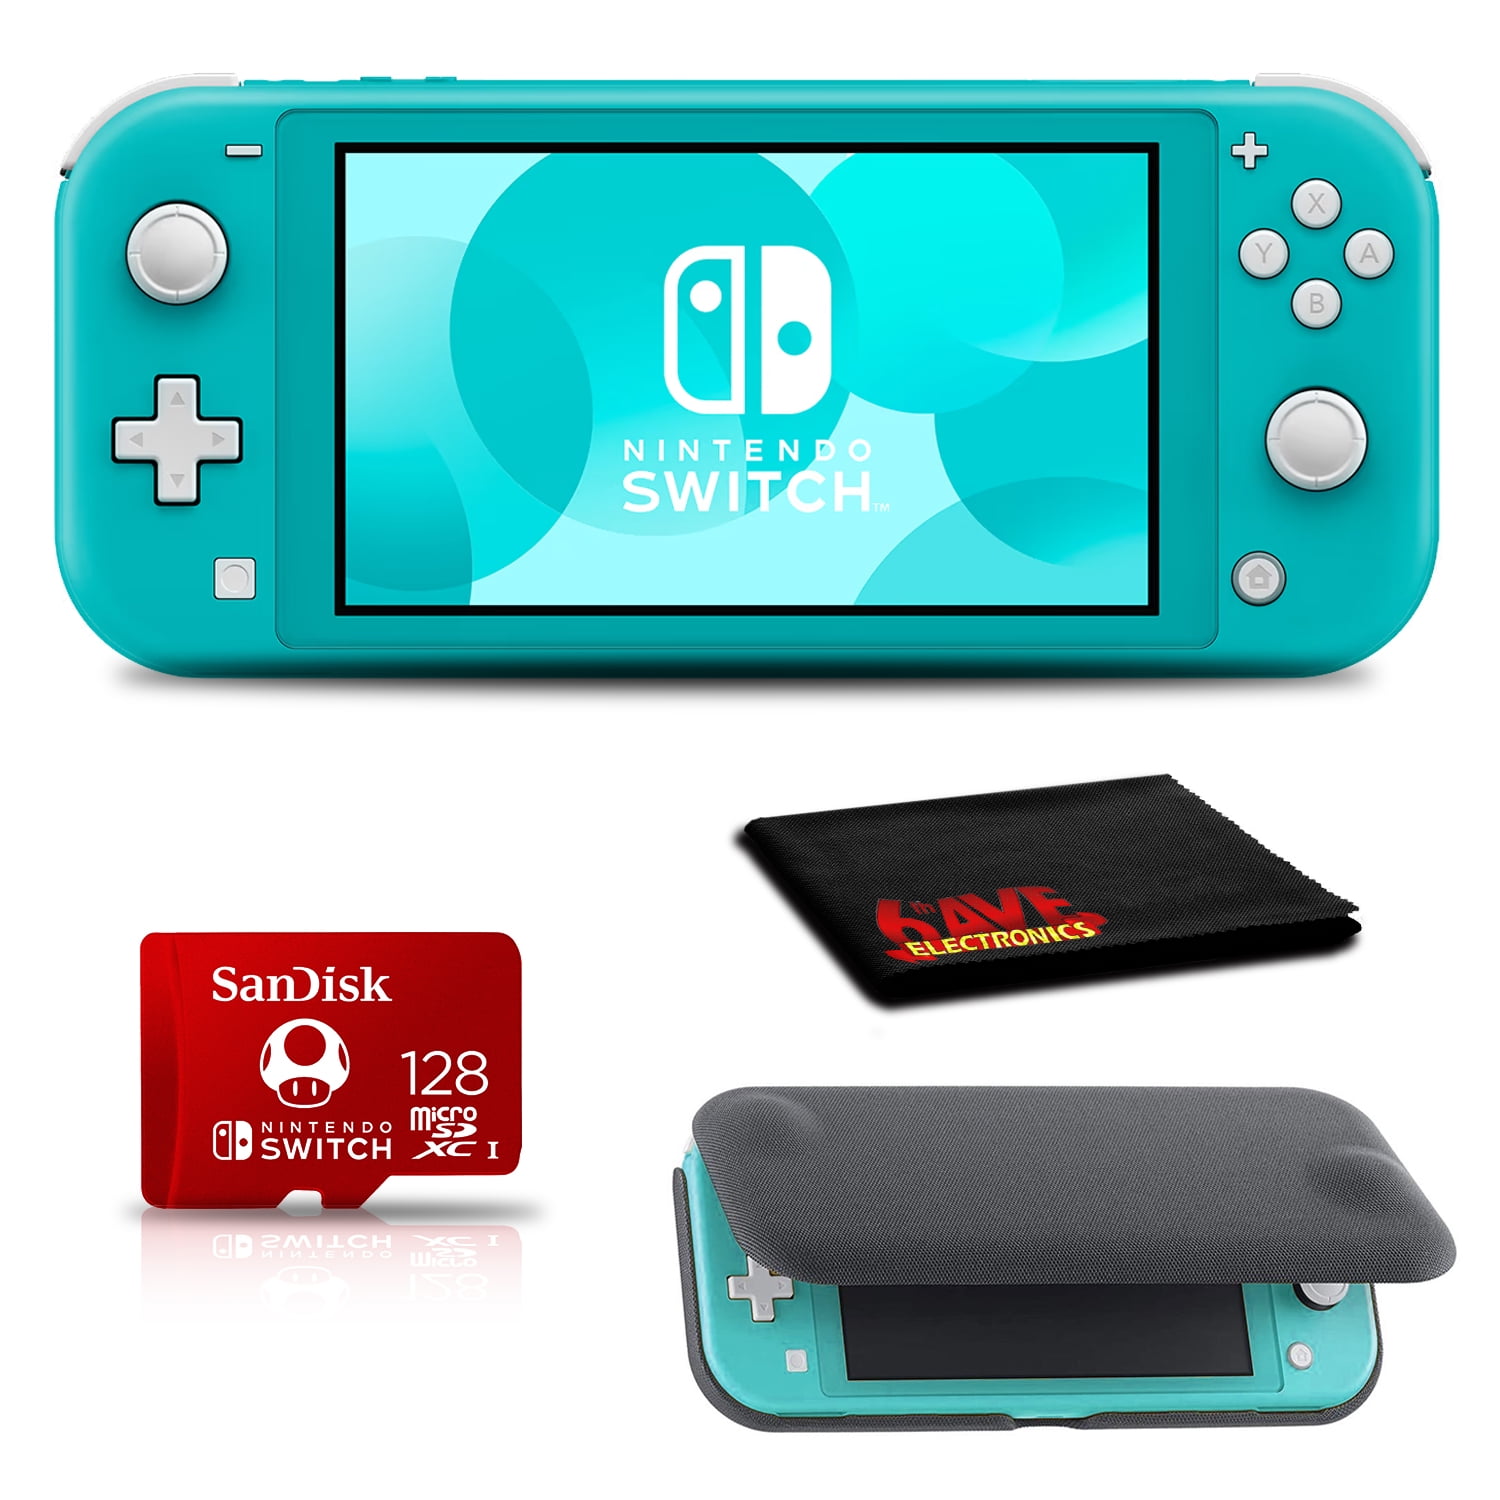 Nintendo Switch Lite 32GB internal storage 5.5 inch LCD touch screen  Bluetooth 4.1Wi-Fi NFC Blue Turquoise Grey Yellow Coral - AliExpress